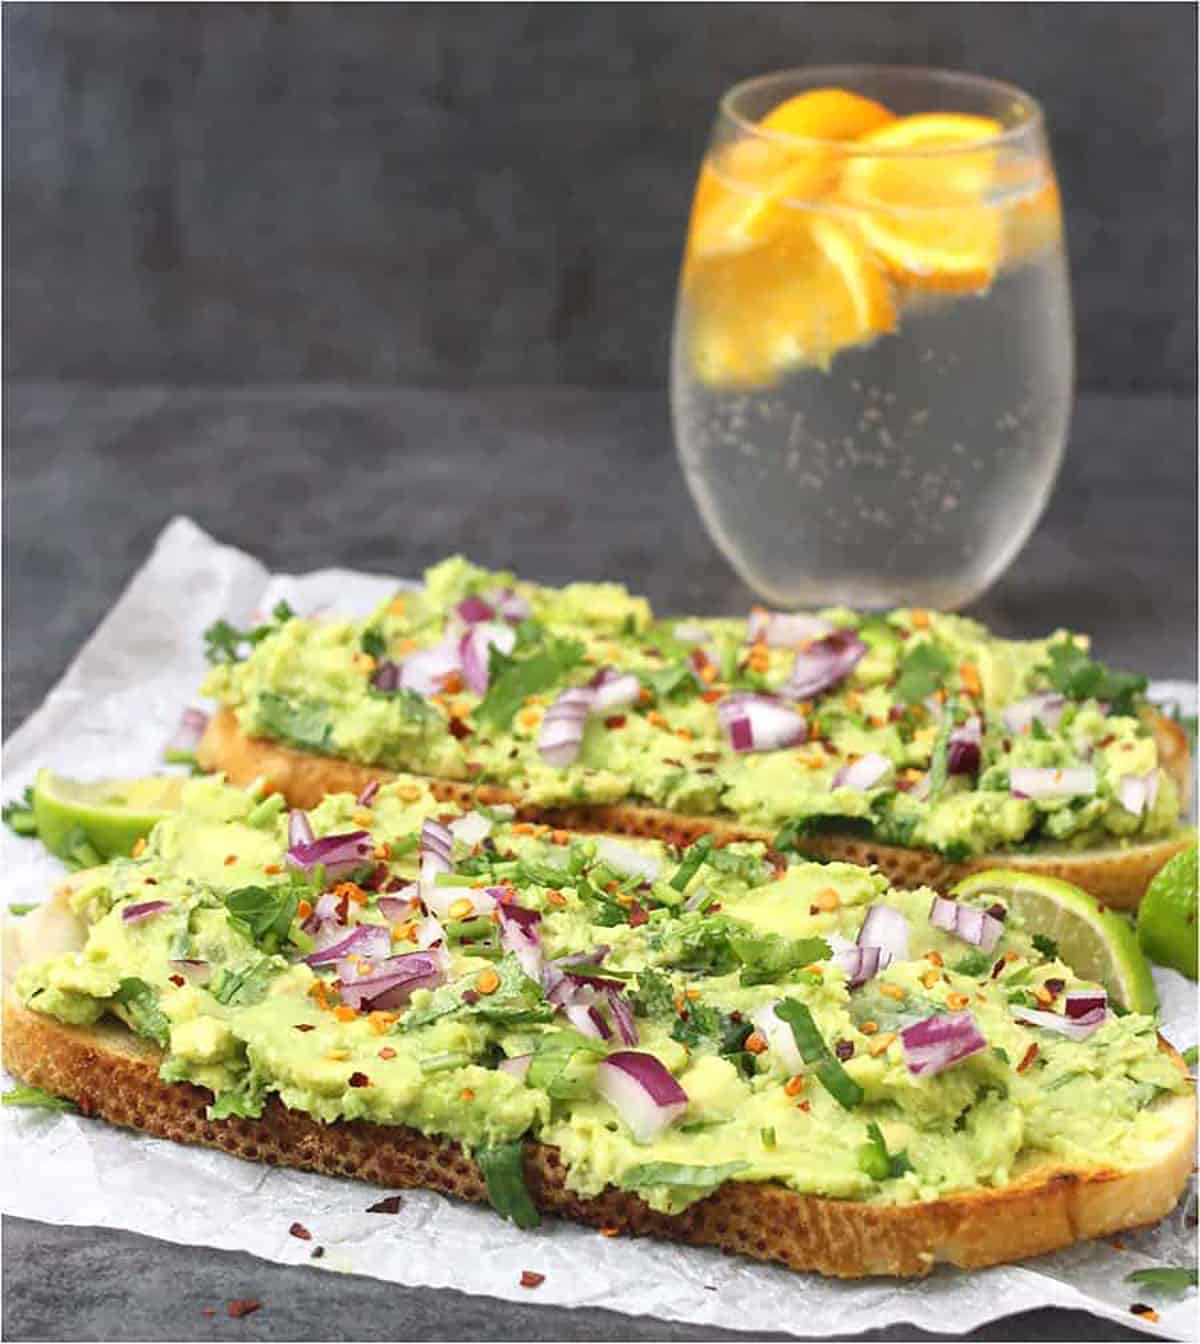 Healthy meal for two, consisting of two large avocado toasts topped with onion and cilantro.